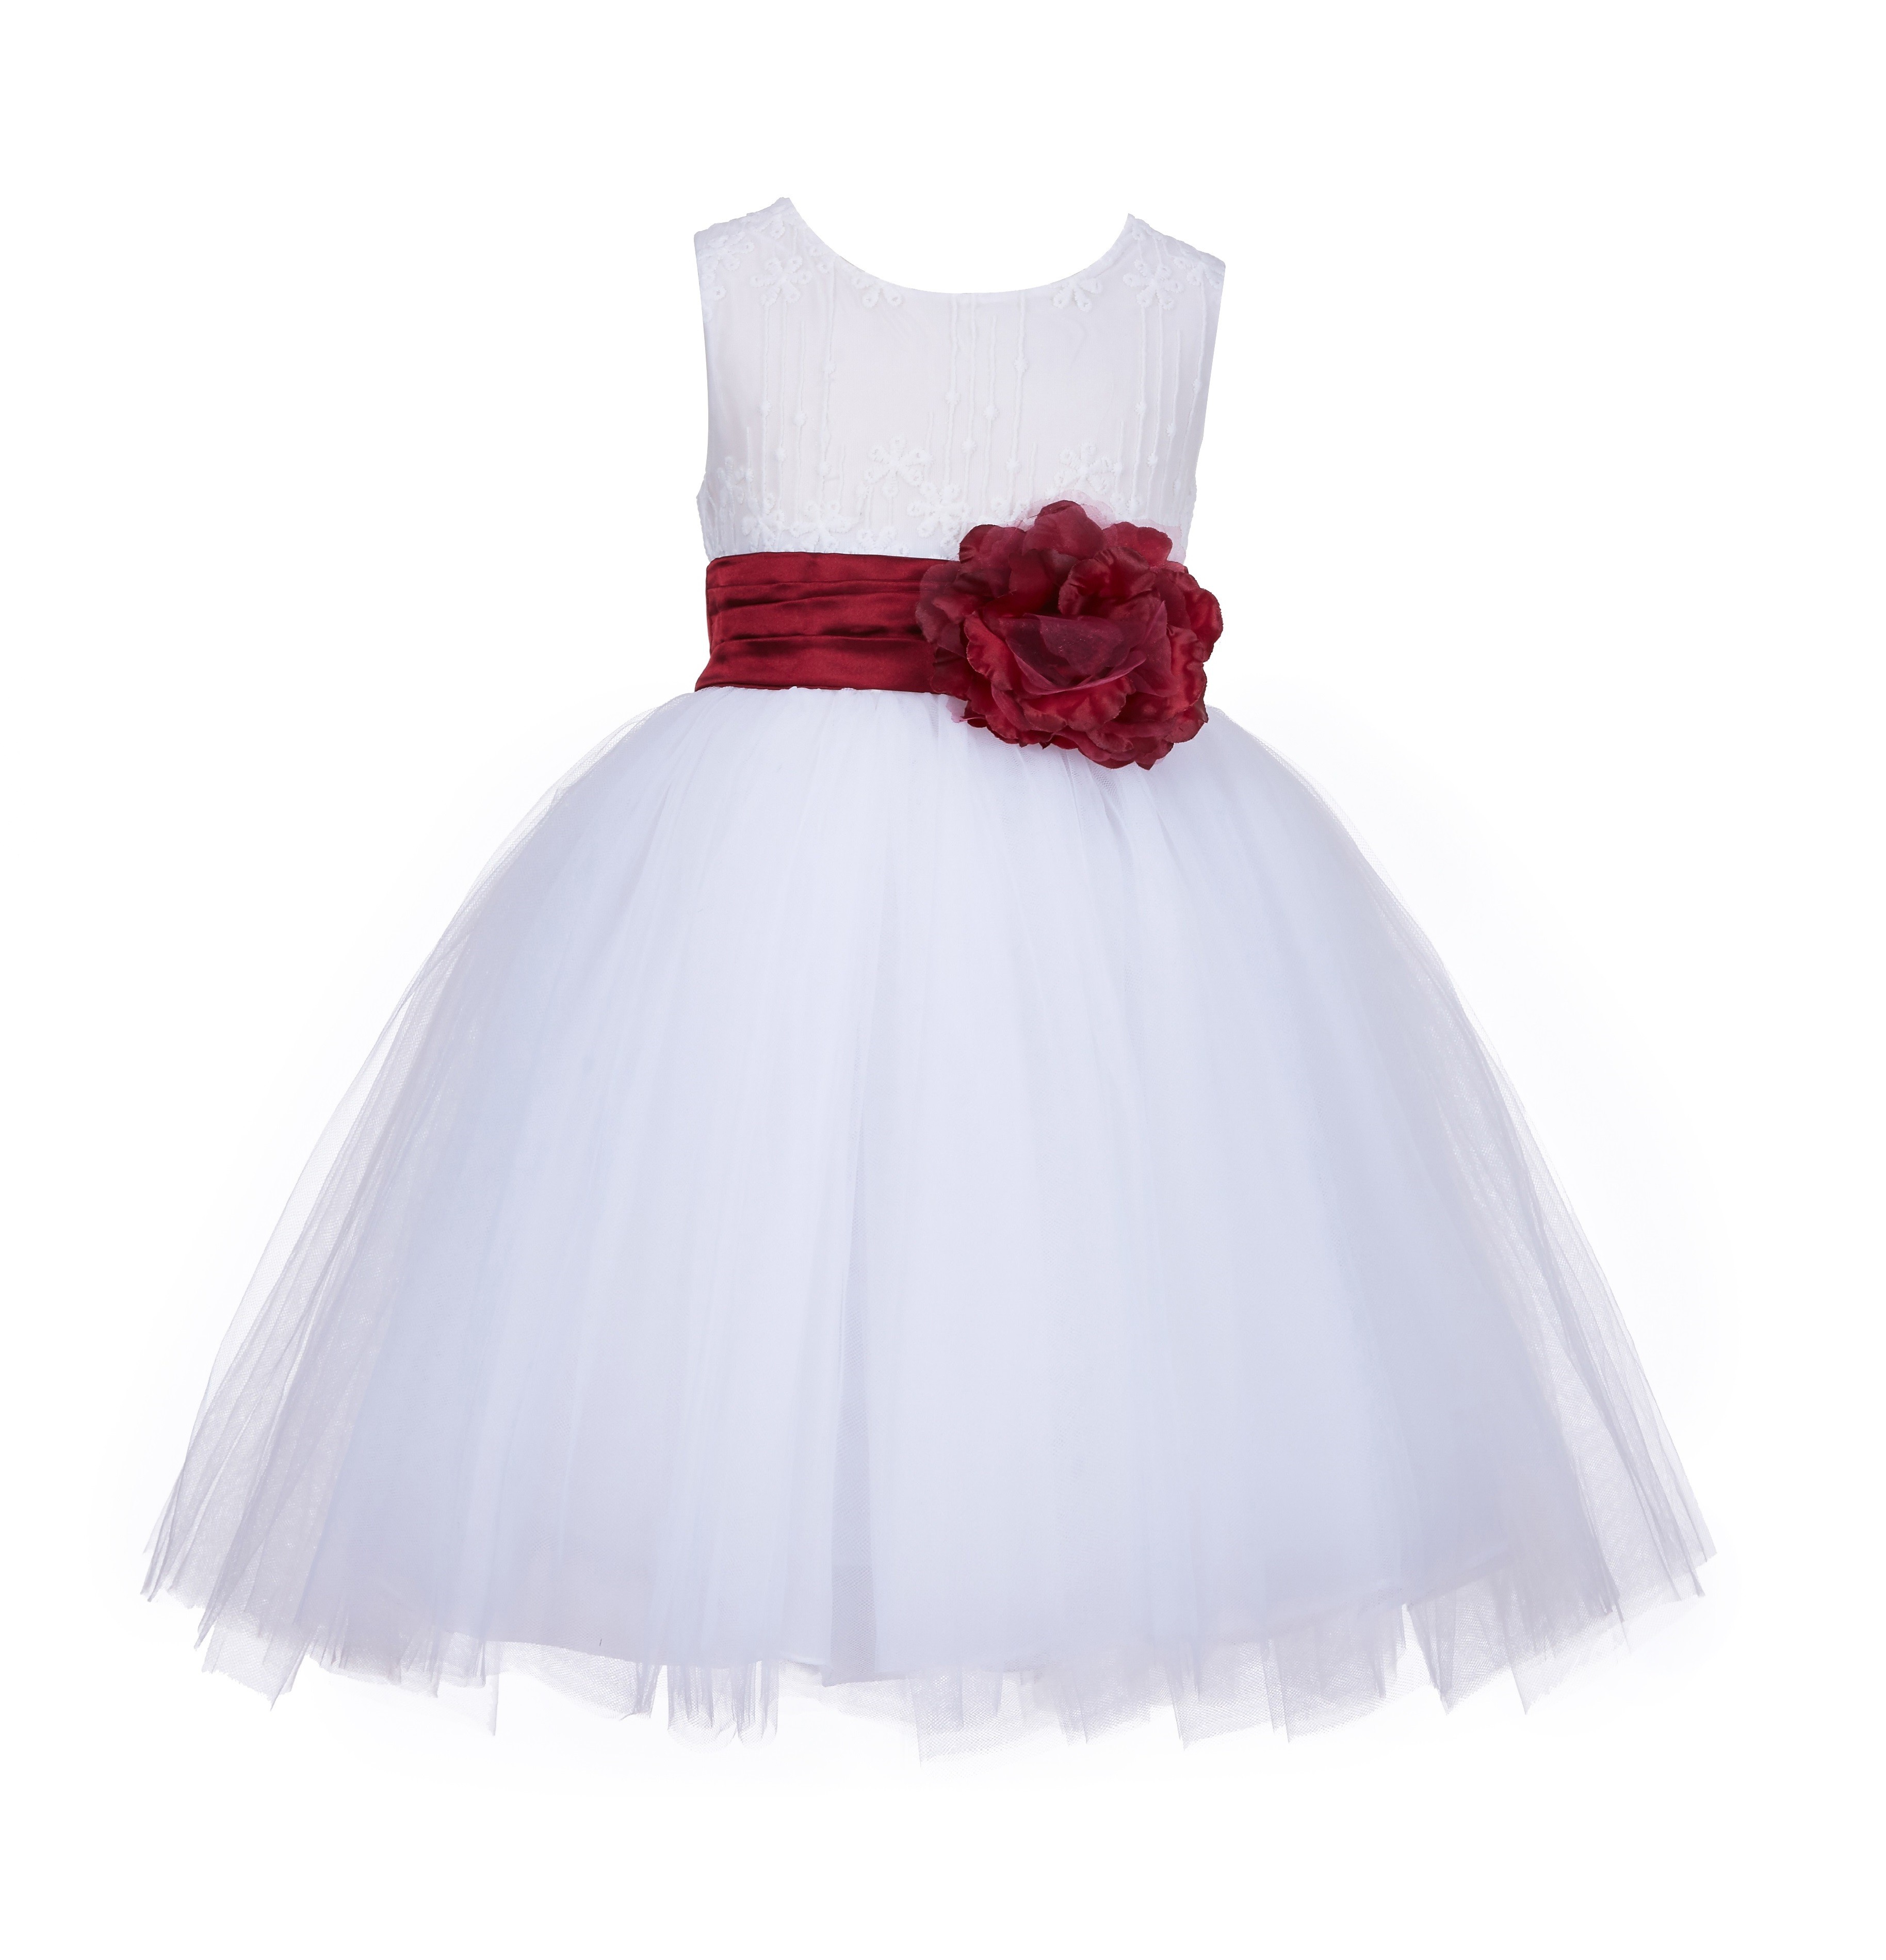 White/Burgundy Lace Embroidery Tulle Flower Girl Dress Wedding 118